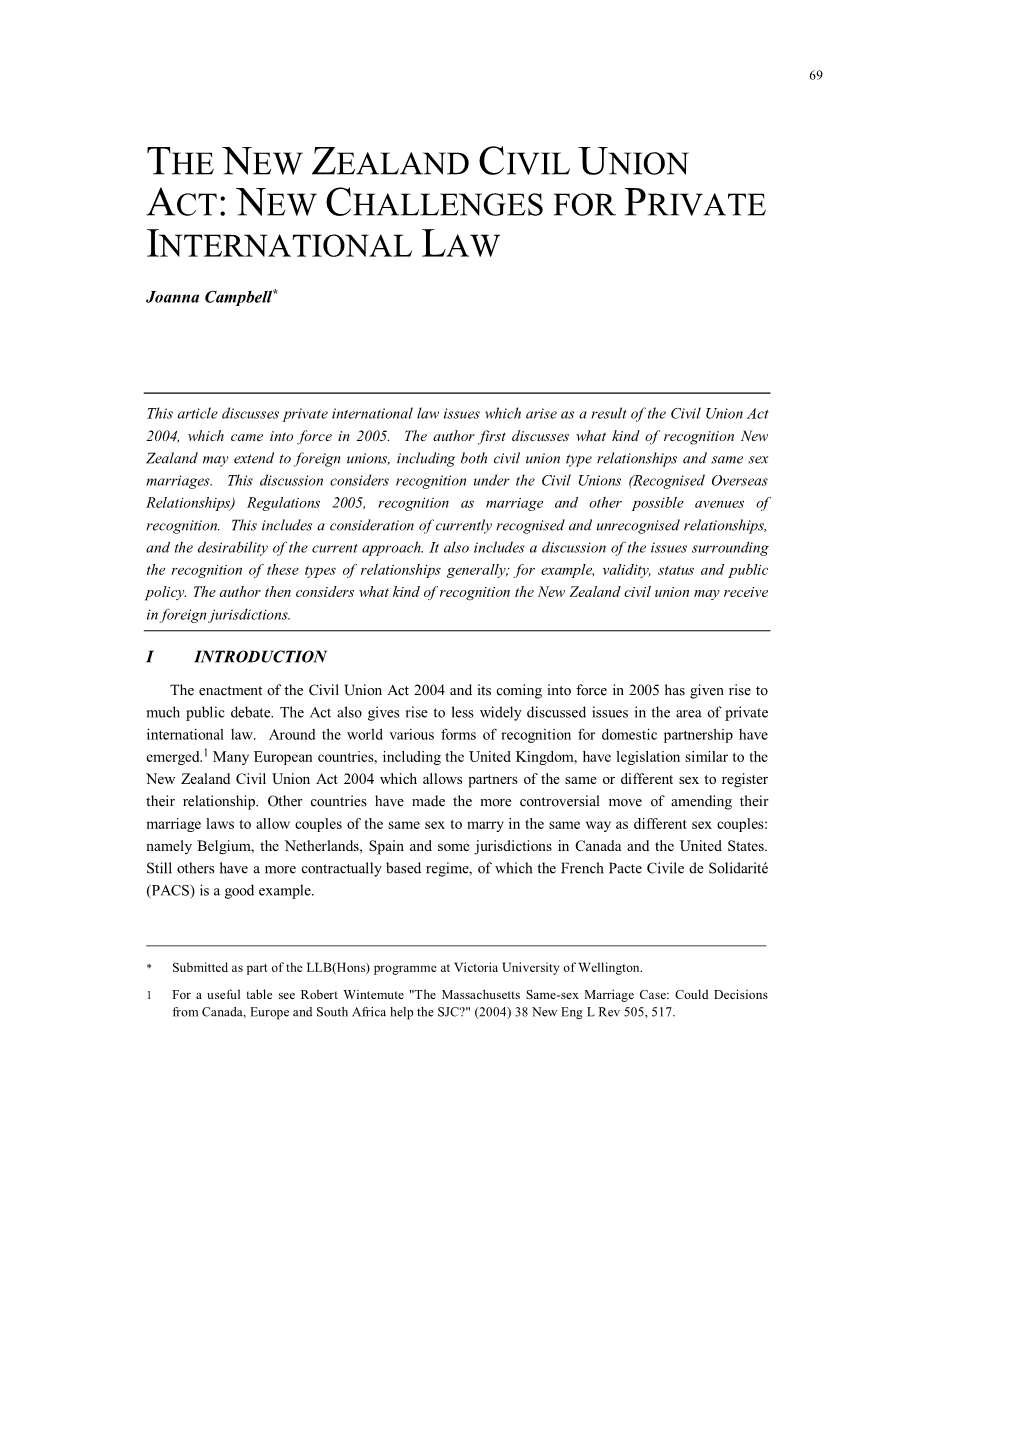 The New Zealand Civil Union Act: New Challenges for Private International Law